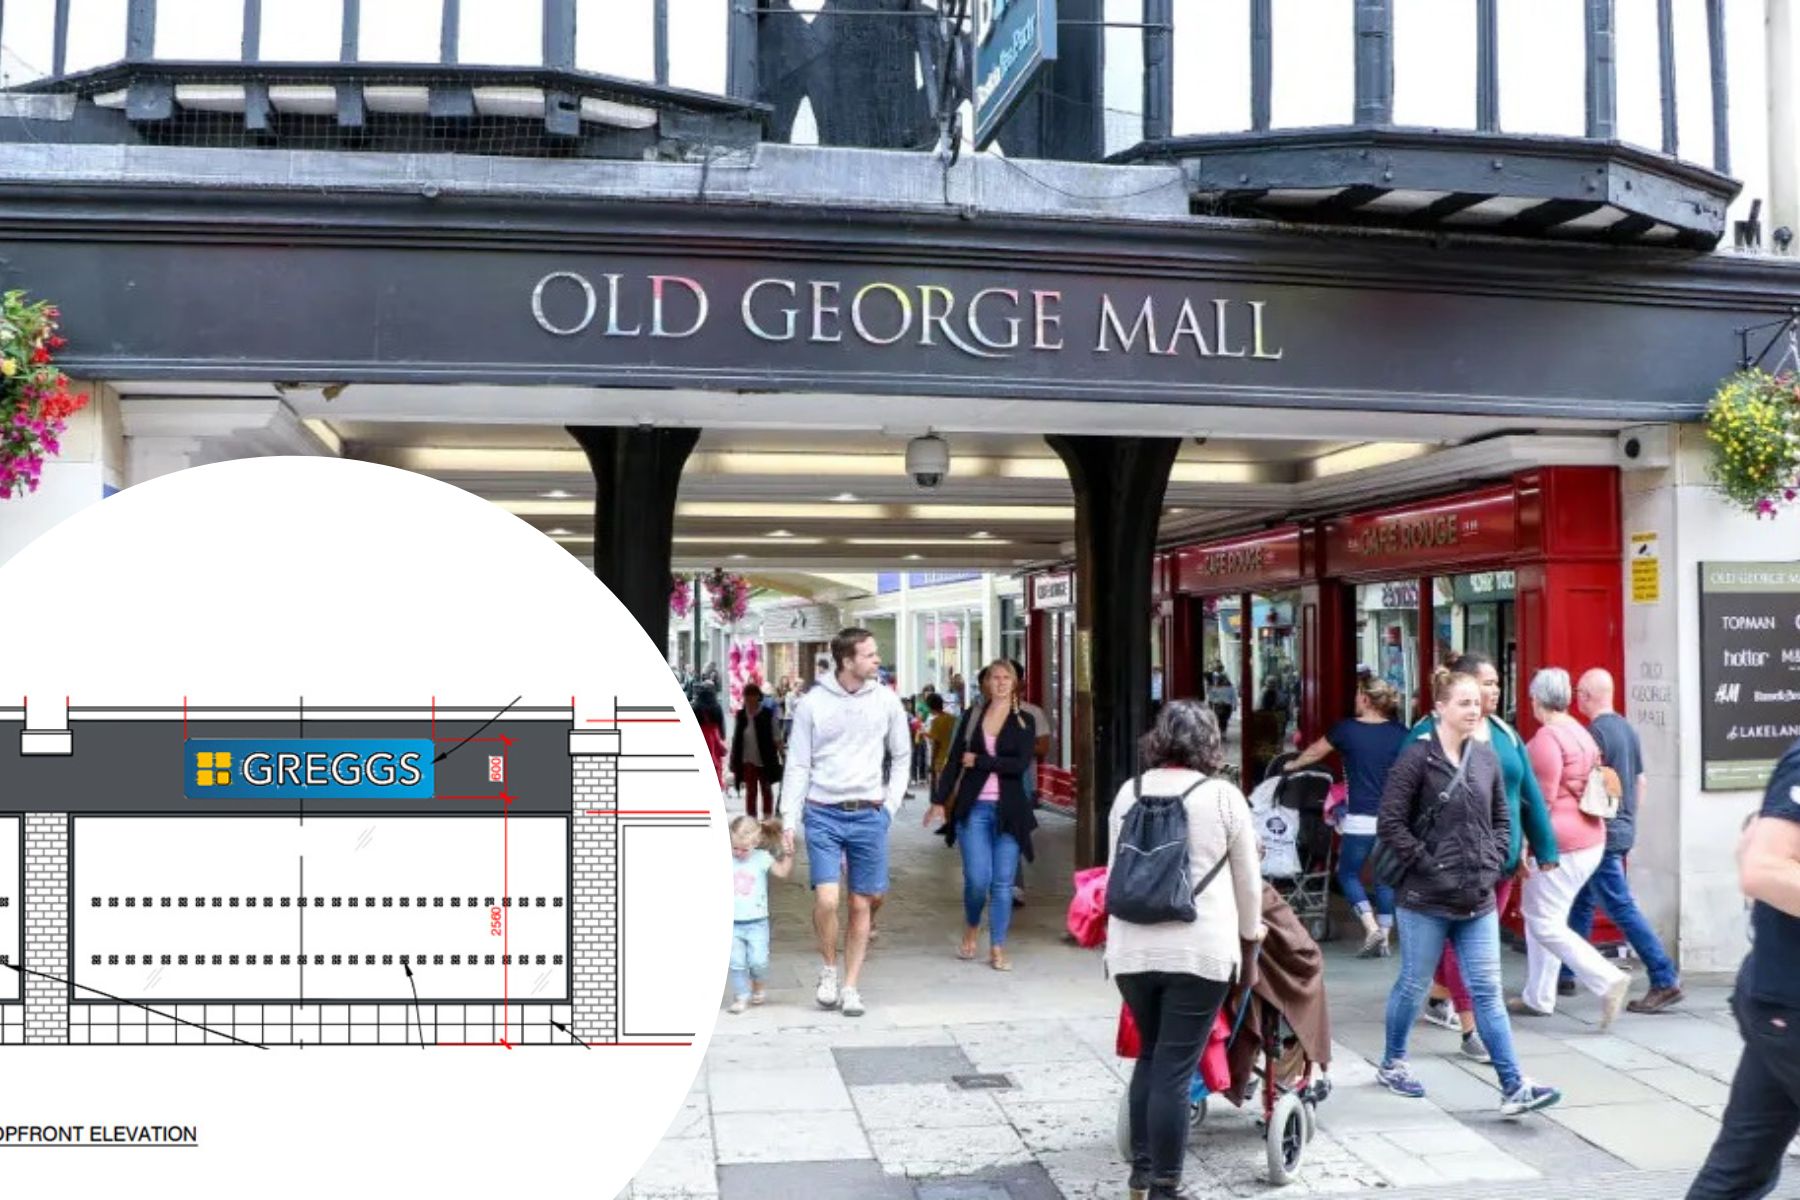 Greggs has applied for new signs at a store in the Old George Mall, Salisbury